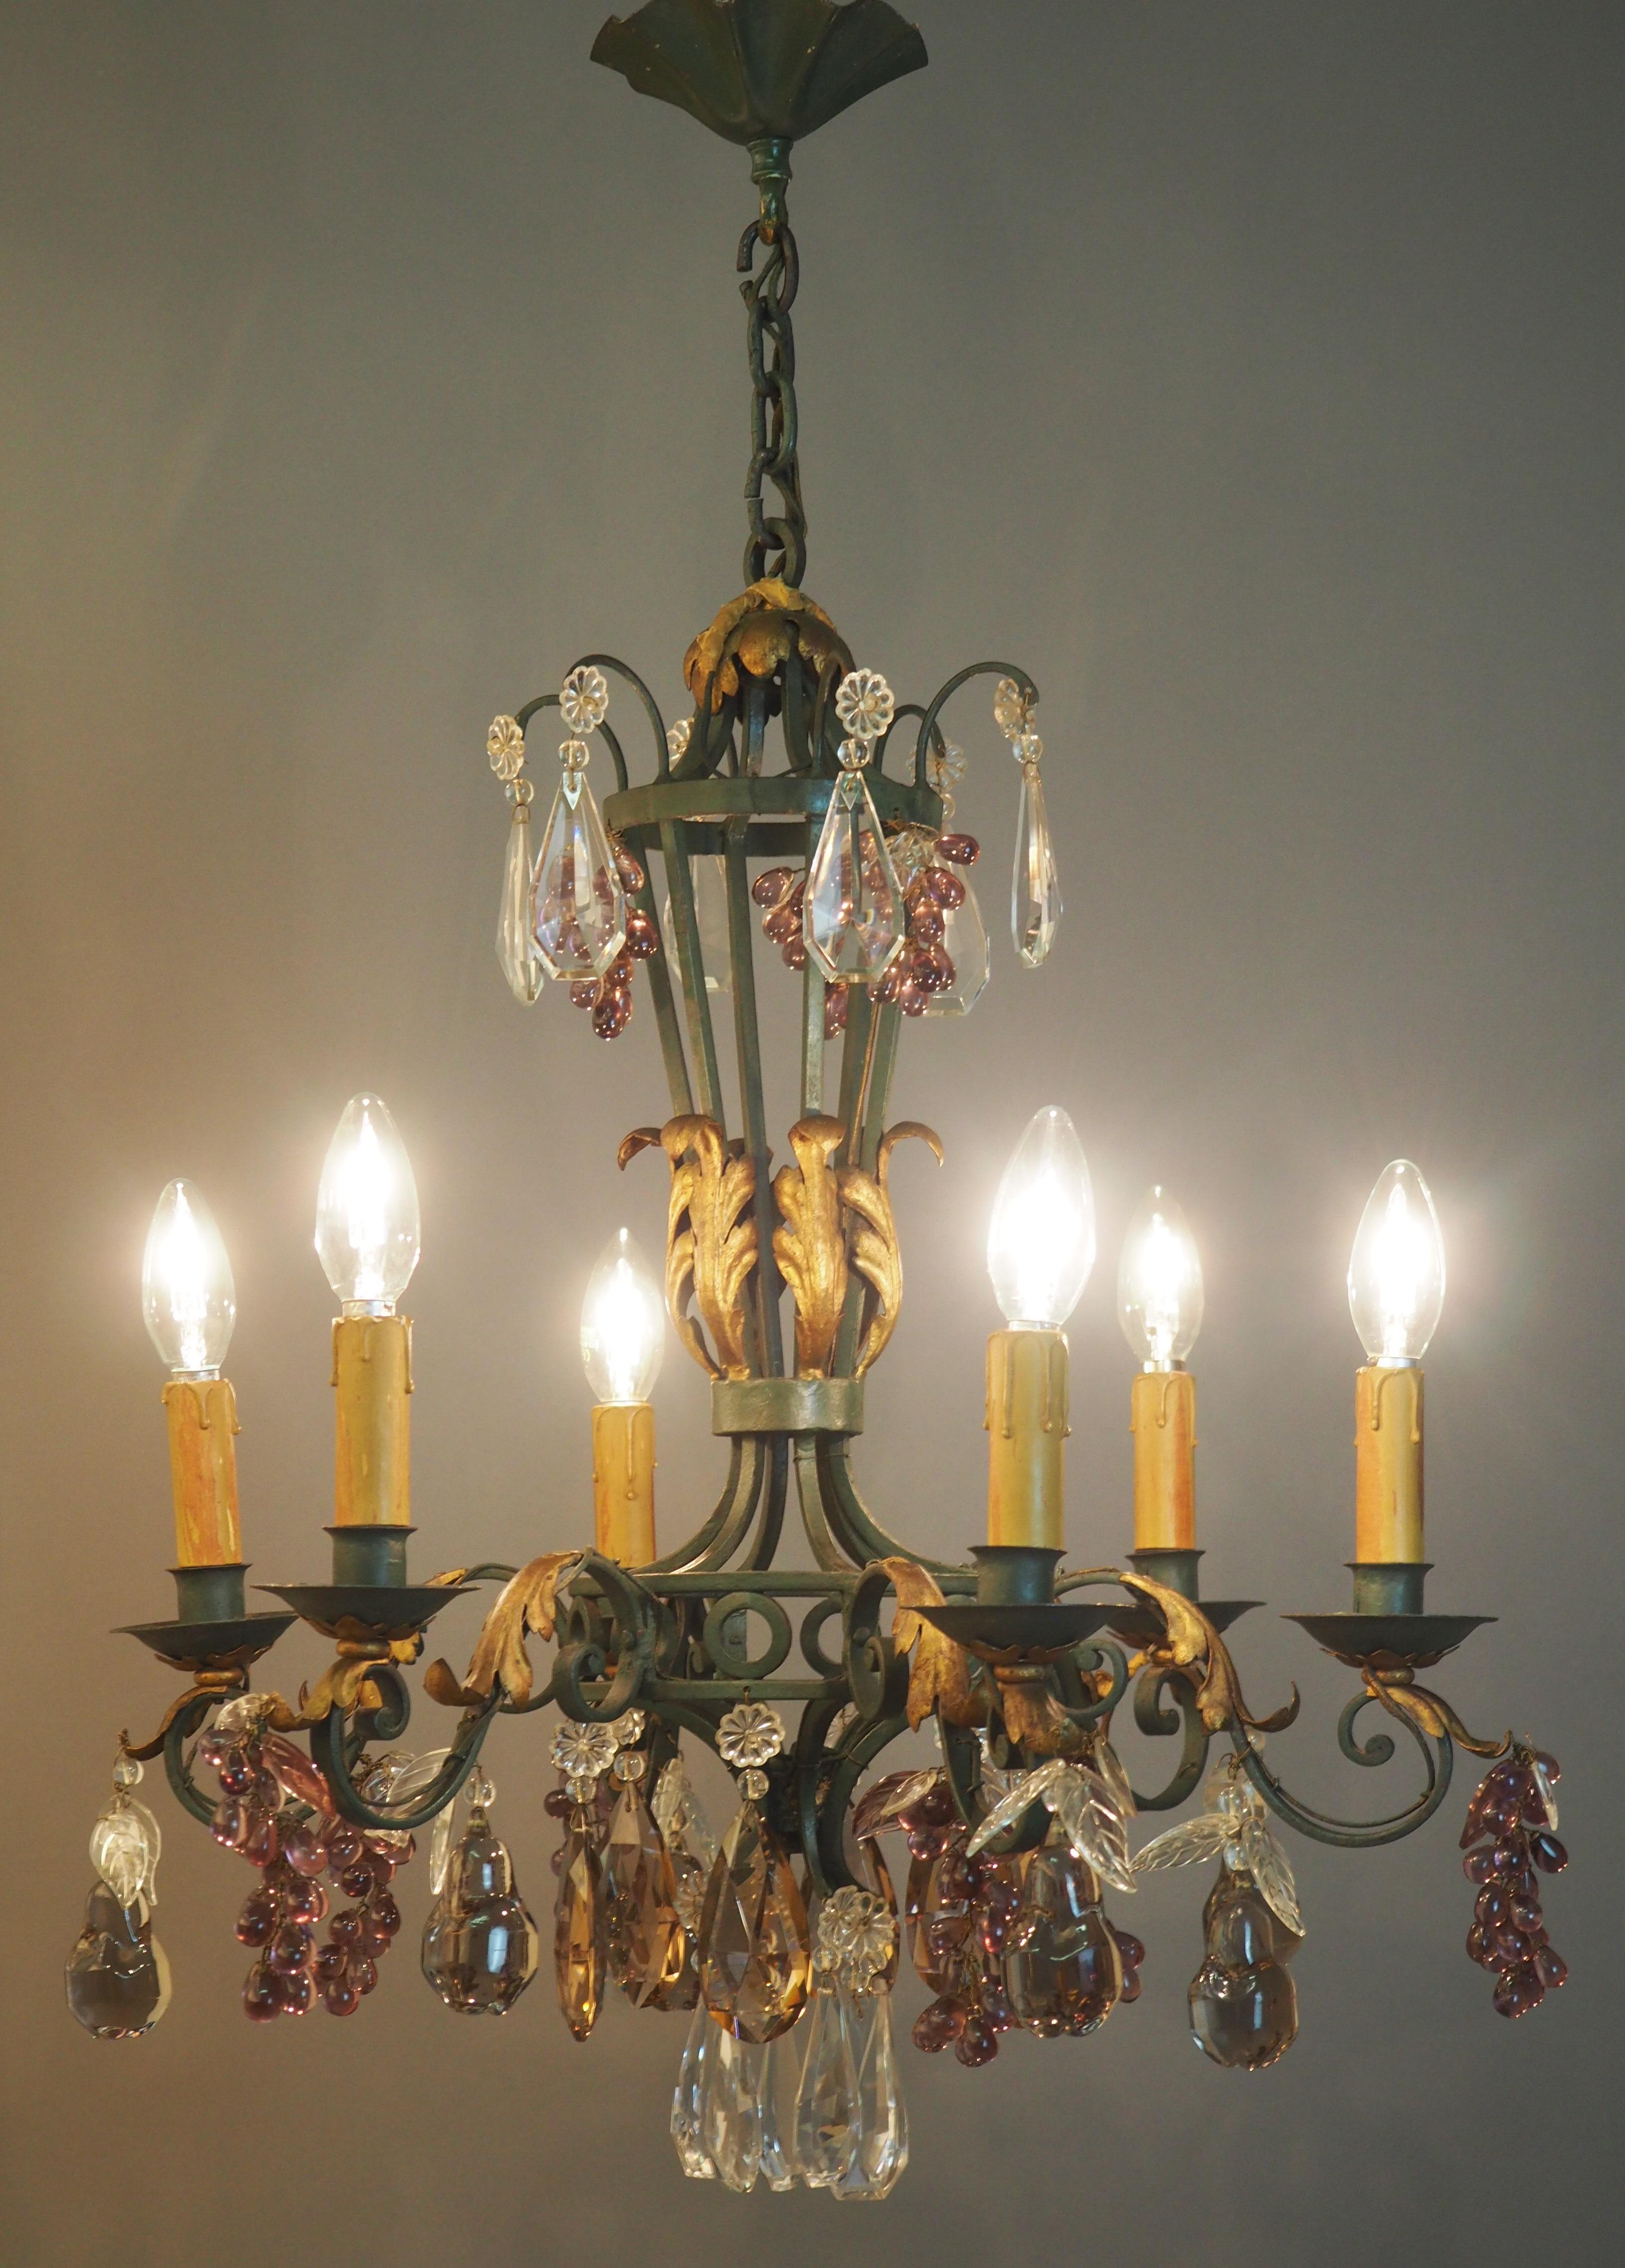 A wonderful, green patinated and gilt wrought iron six-light chandelier decorated with glass pears, leaves greaps and crystal pendants, France, circa 1900-1920s.
Socket: 6 x e14  standard screw bulbs.

New wiring for US standards on request.
